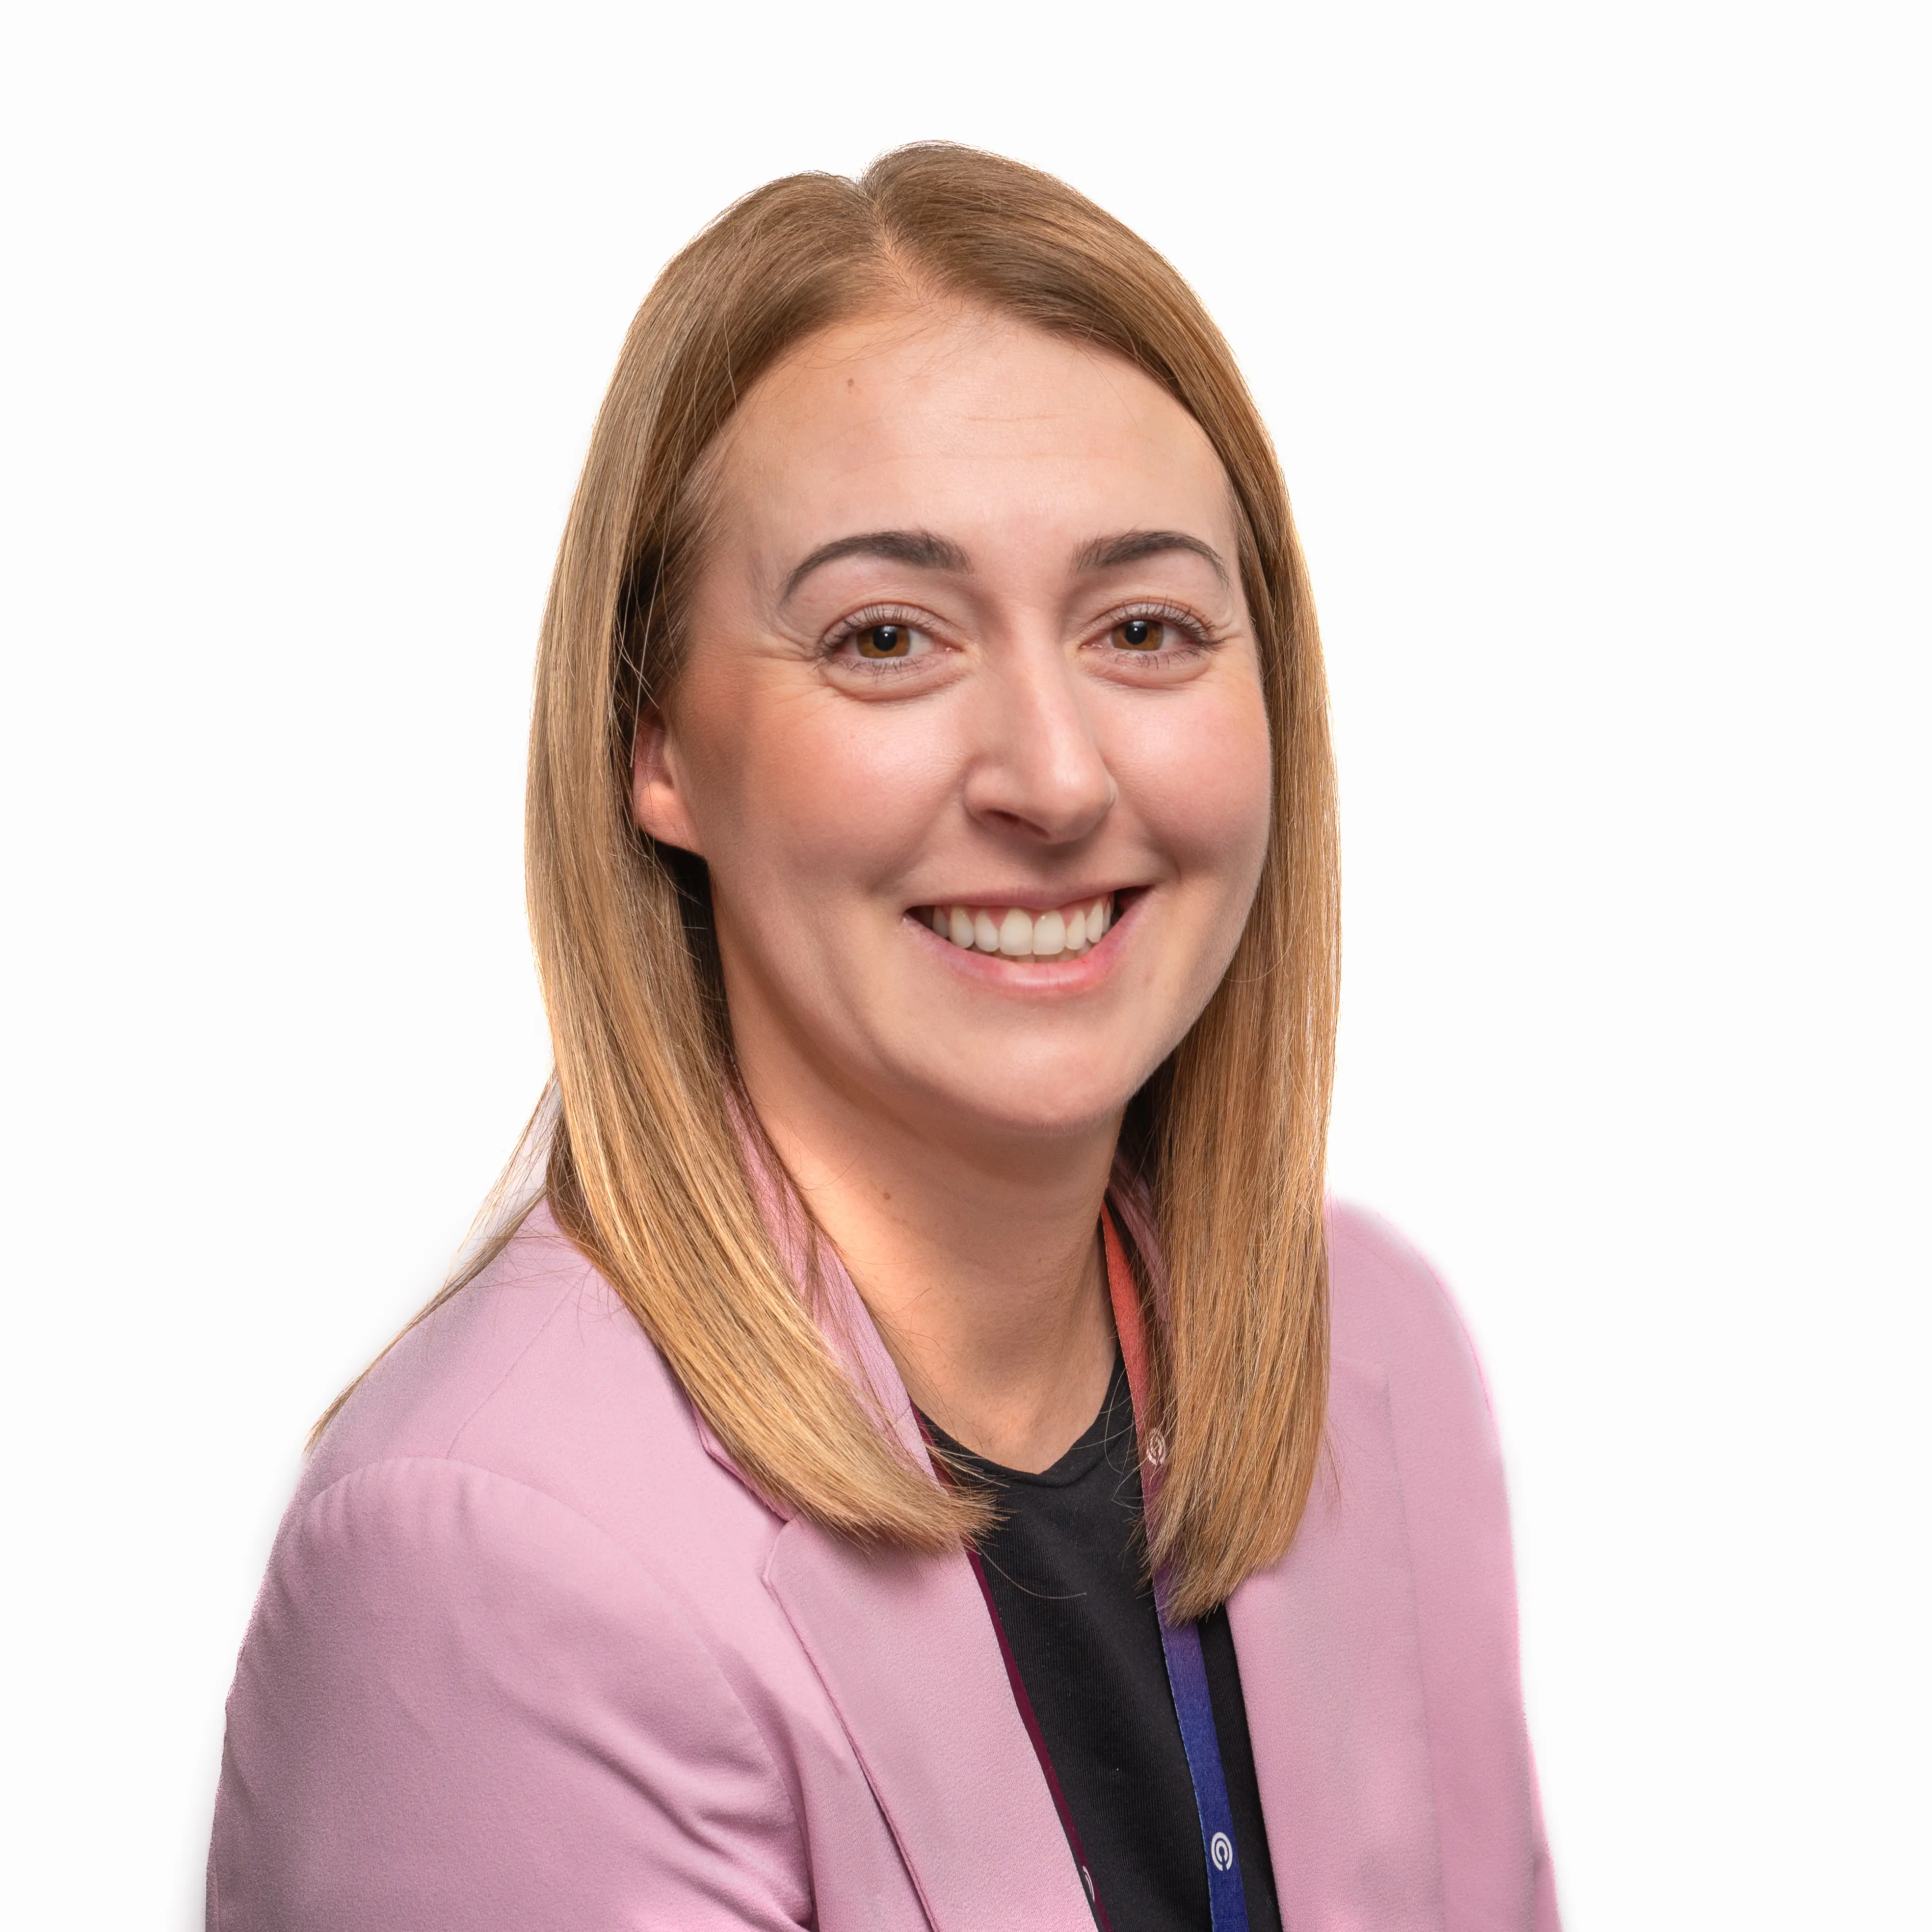 Image of Nicola Beardsell finance director at Compassionate Care Group